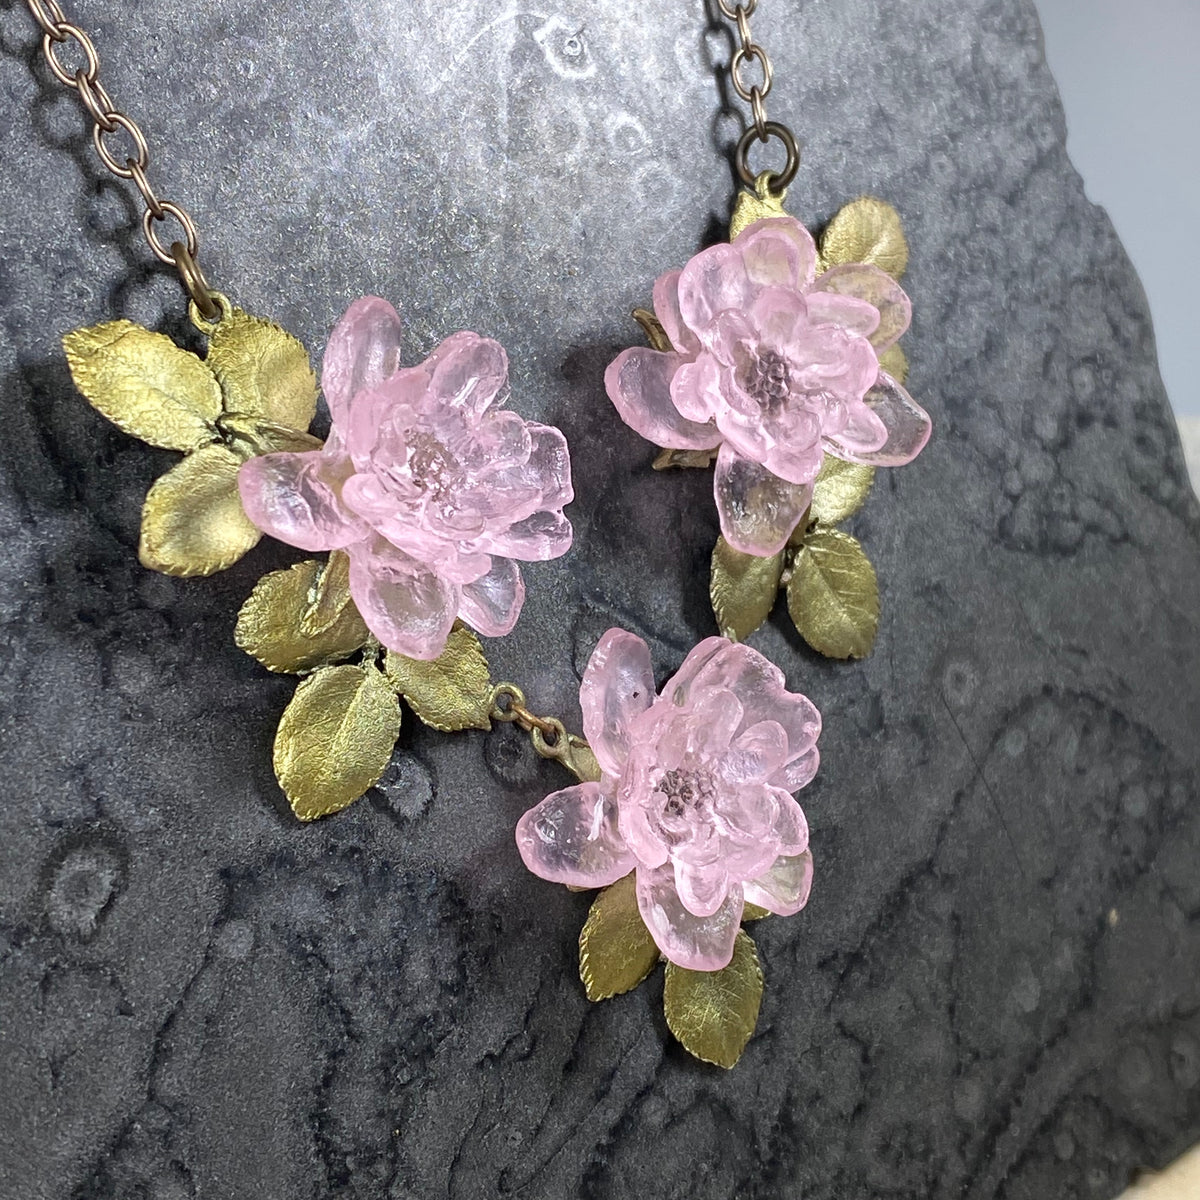 Blushing Rose Statement Necklace - Heart of the Home PA